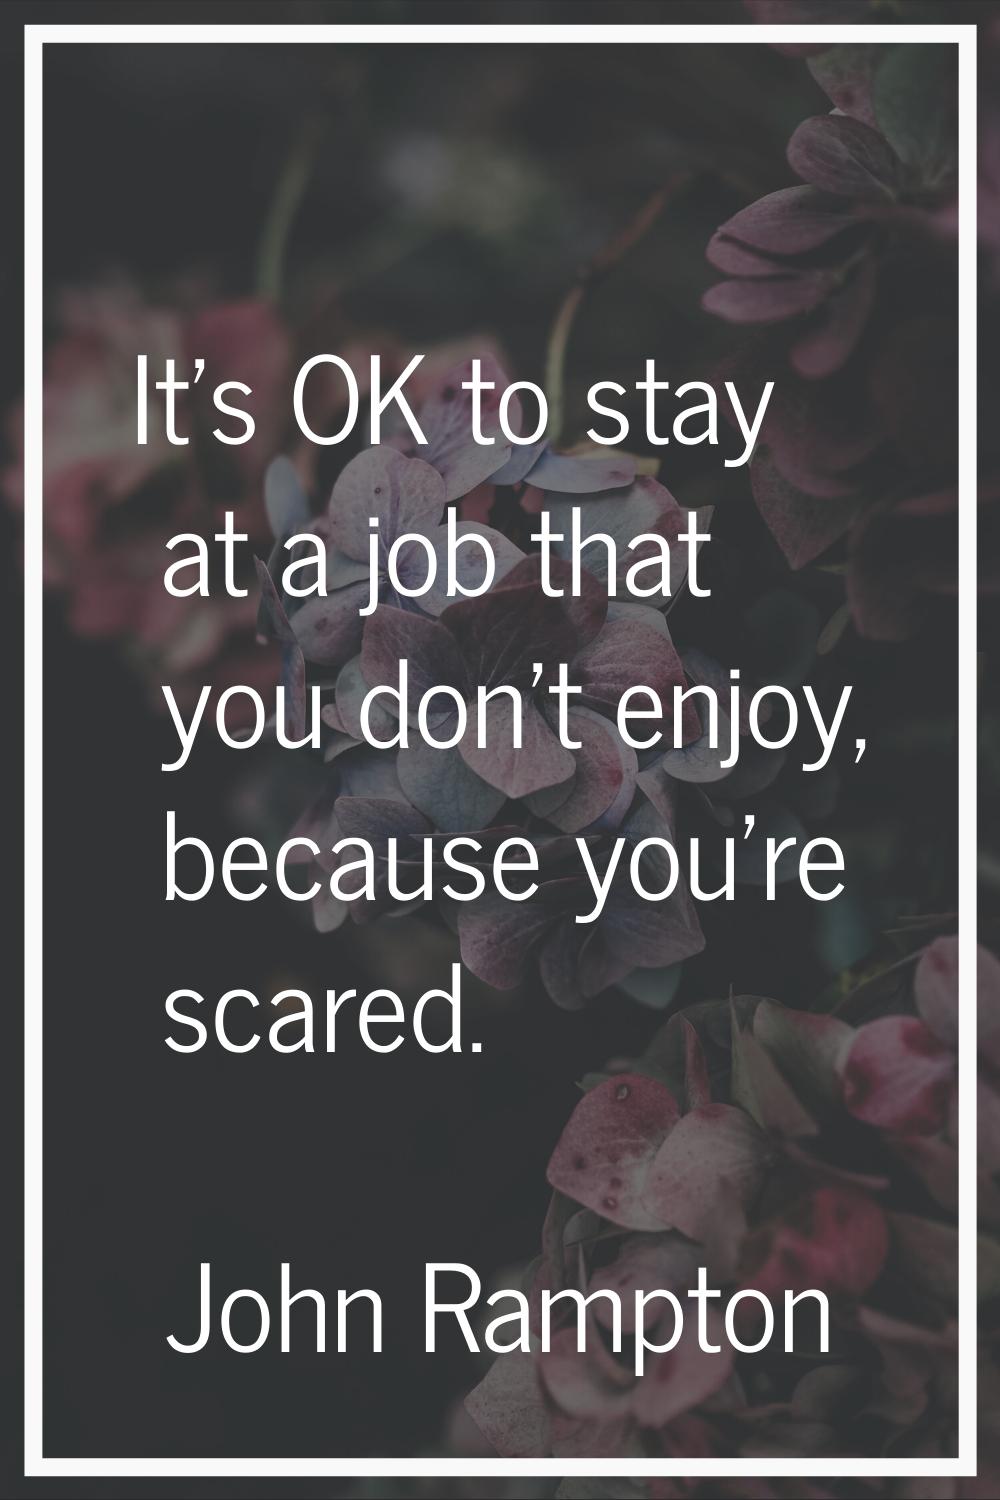 It's OK to stay at a job that you don't enjoy, because you're scared.